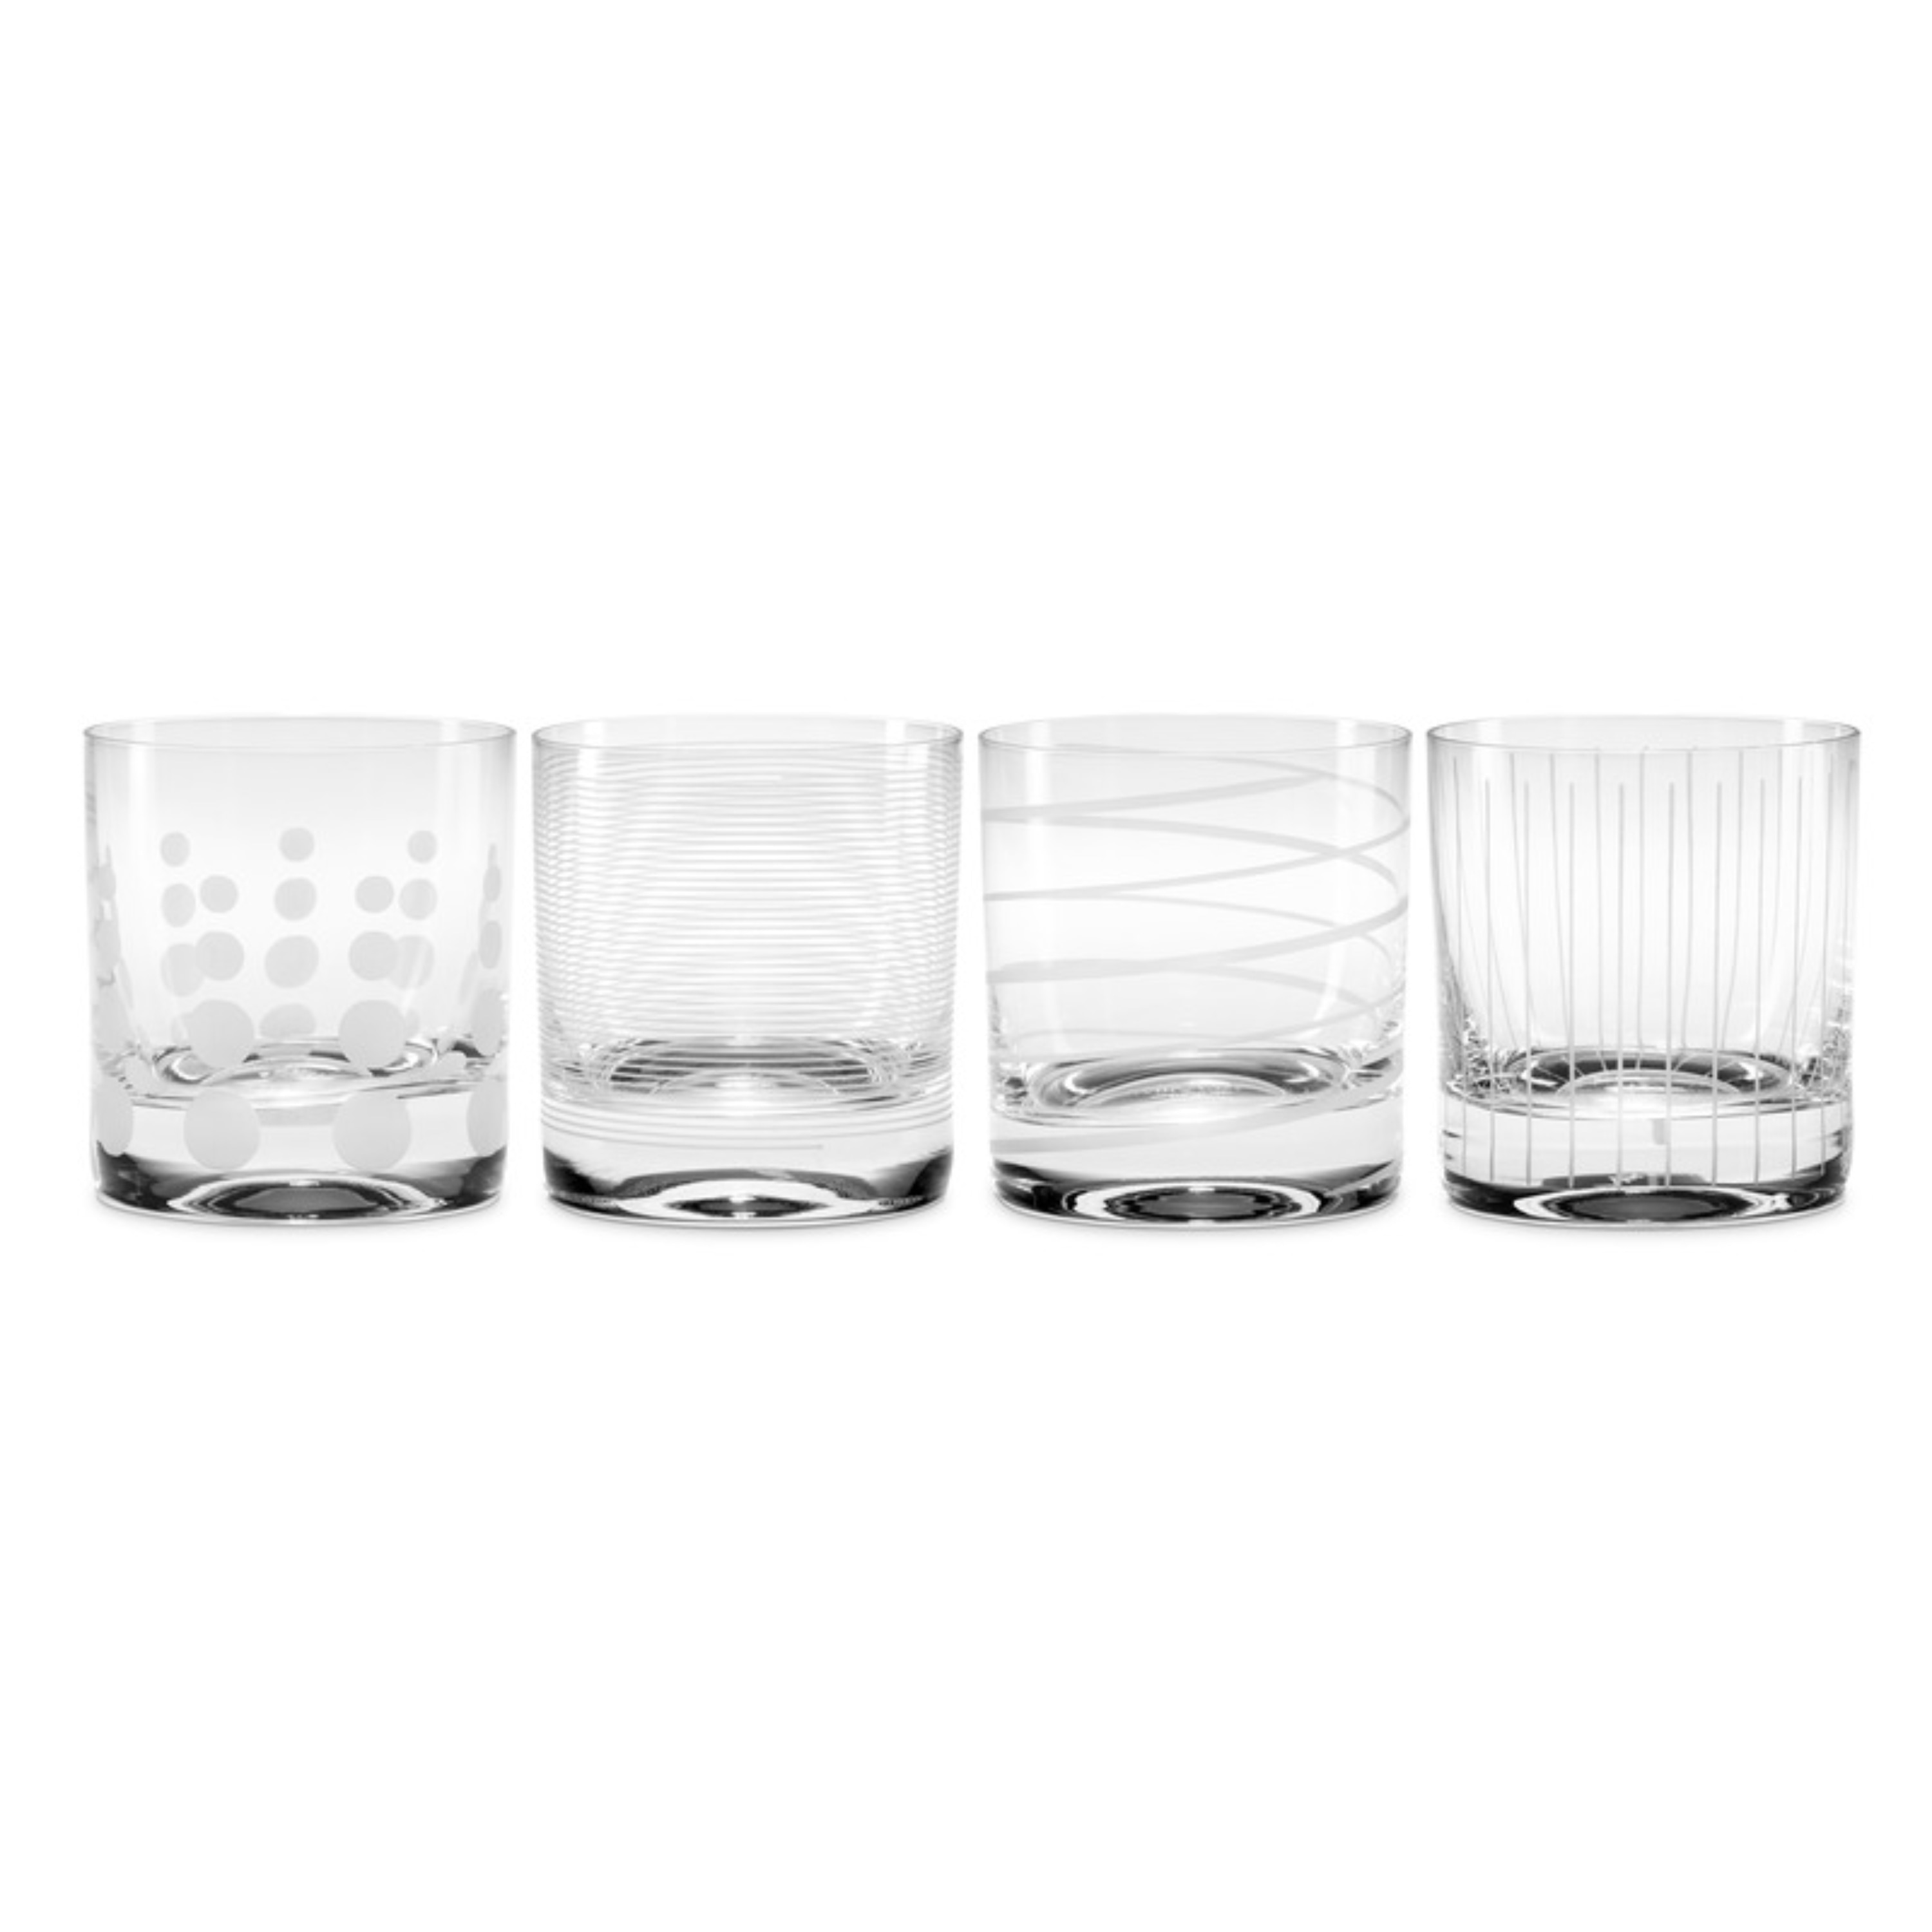 Mikasa Set of 4 Cheers Crystal Champagne Flute Glasses, Silver